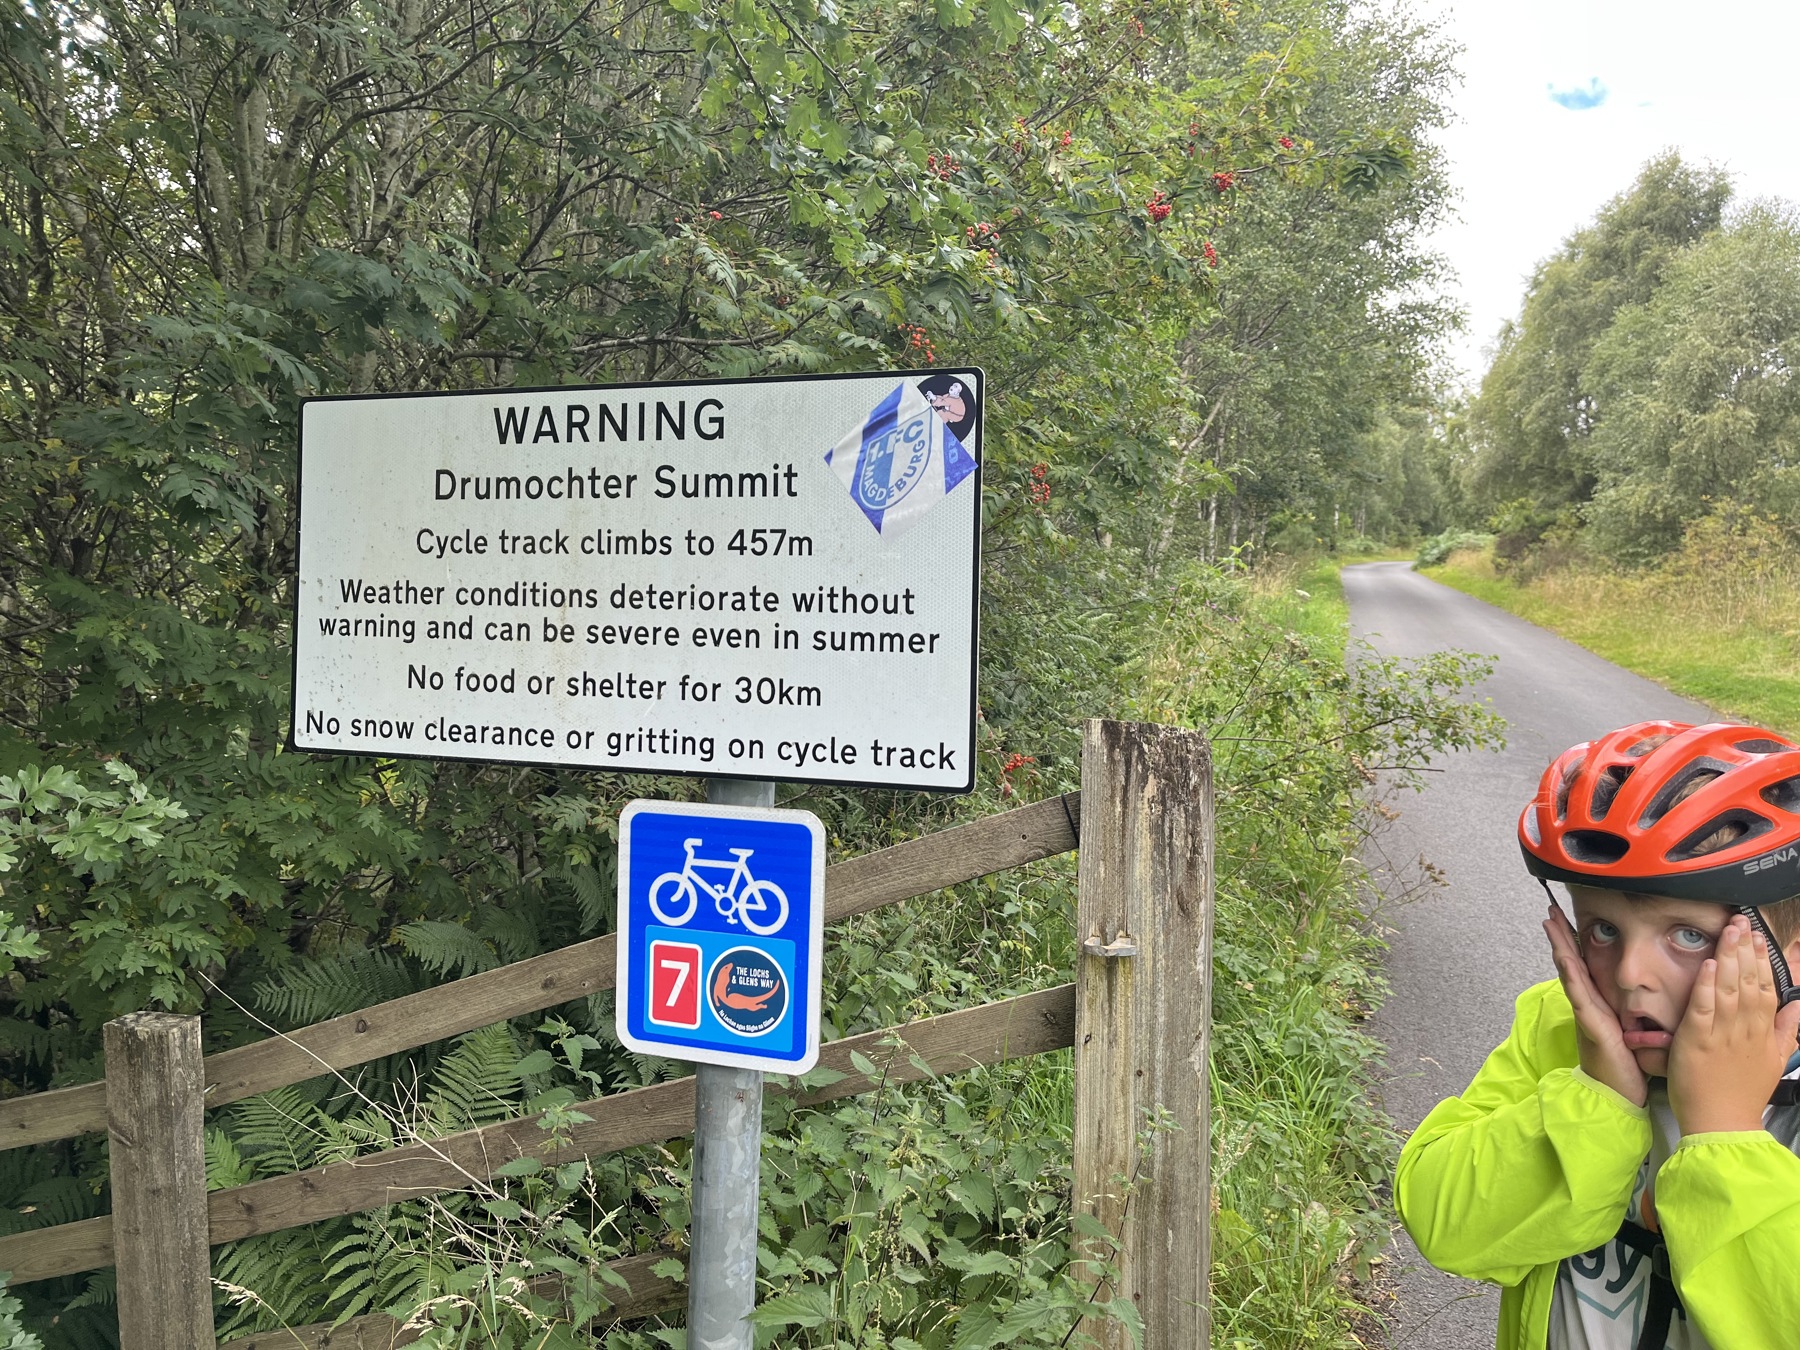 Harry with his hands to his face by a sign to Drumochter Summit that shows a cycle climb of 457 metres